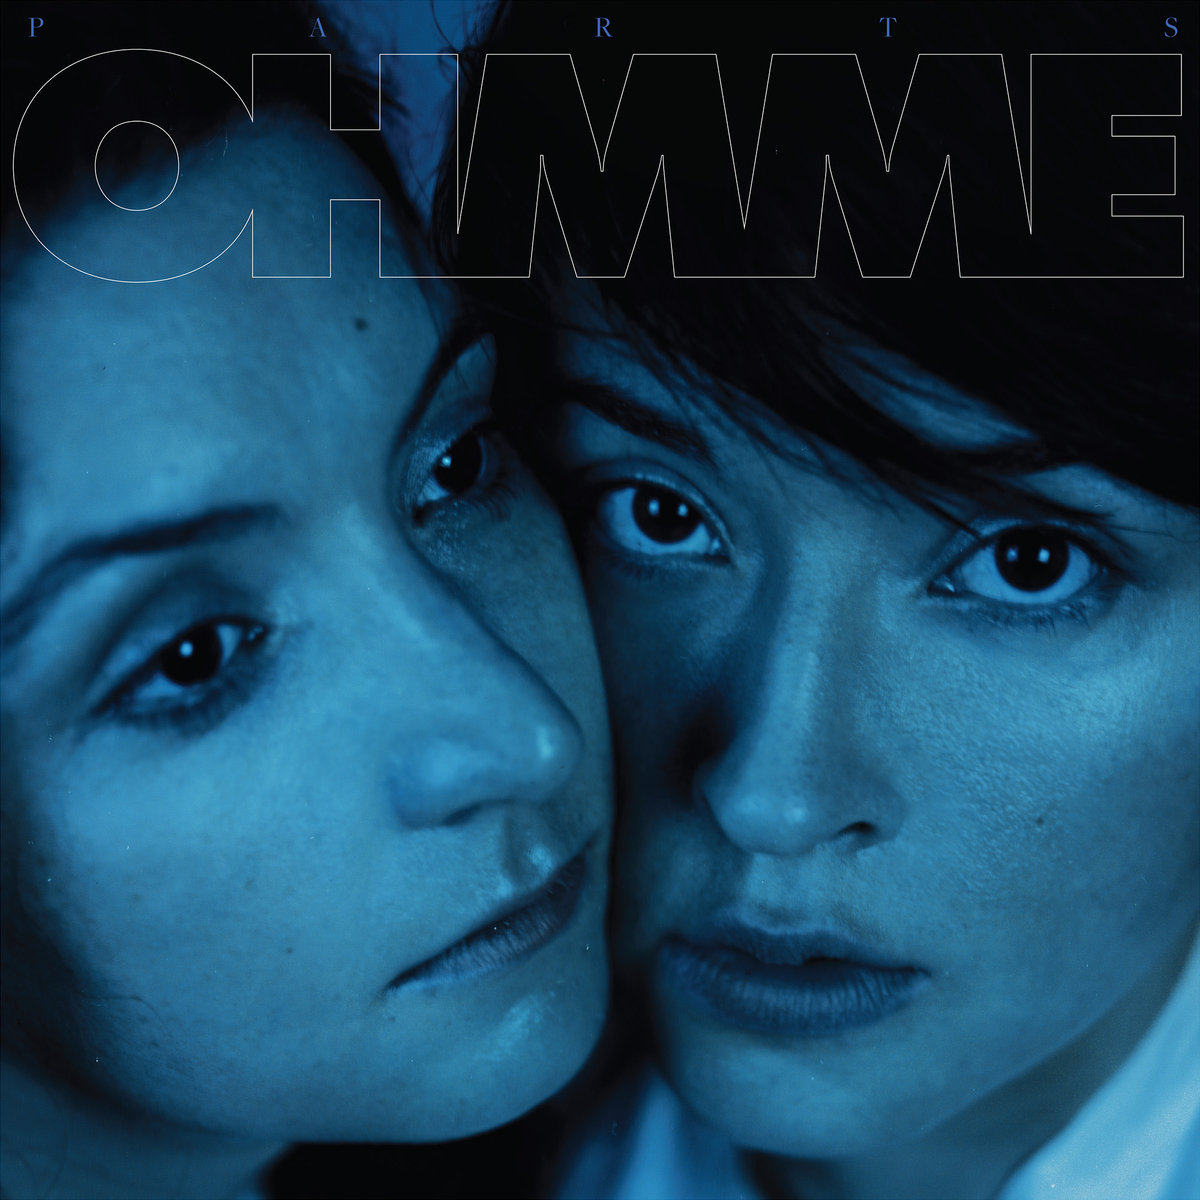 Sima Cunningham and Macie Stewart on the cover of their debut full-length album Parts